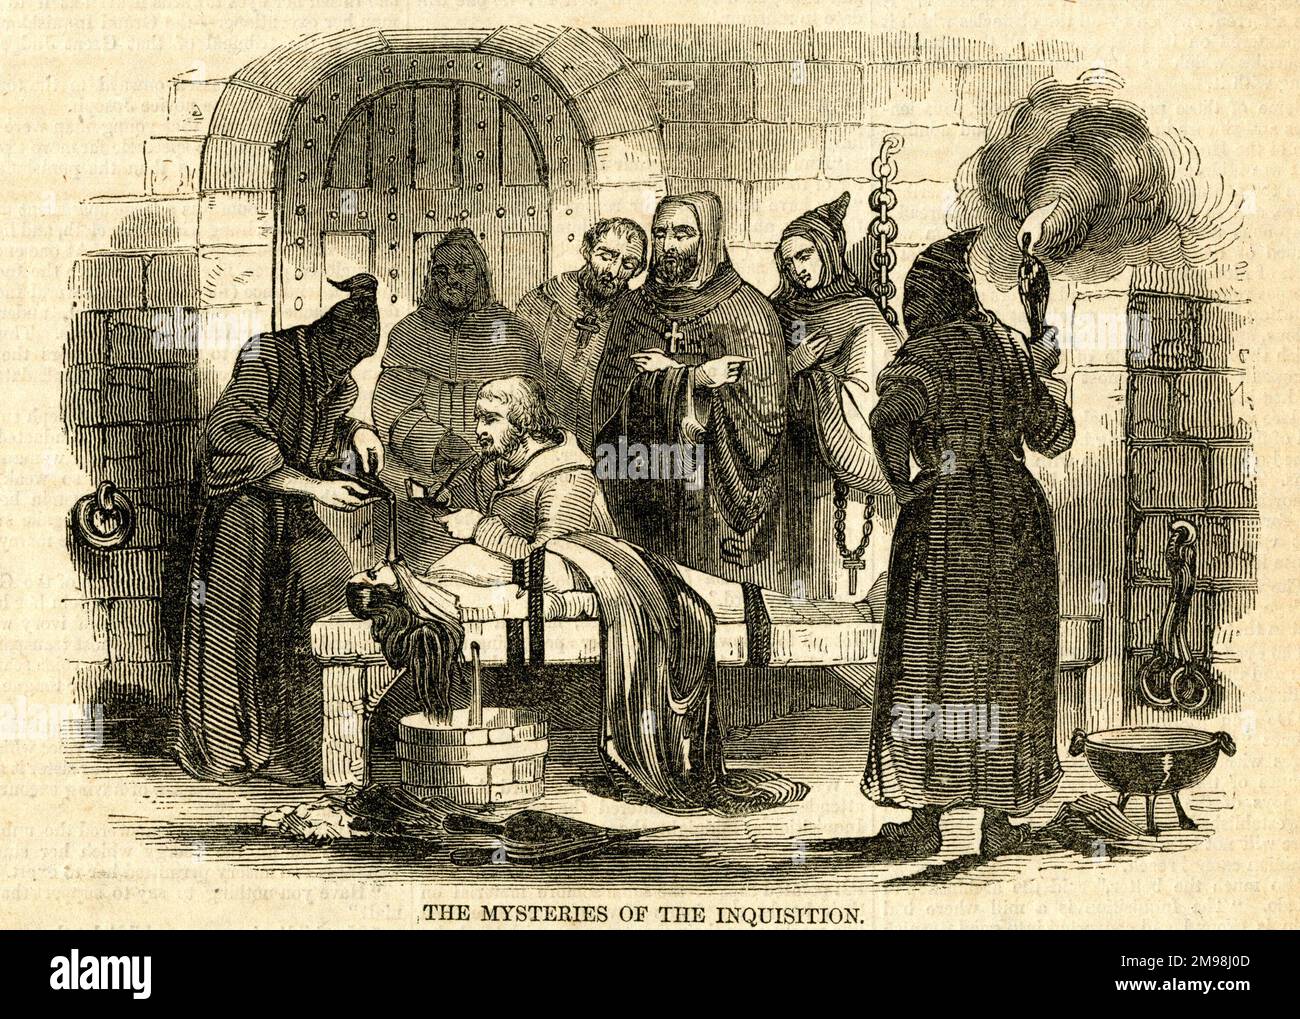 The Mysteries of the Inquisition - a torture scene. Stock Photo